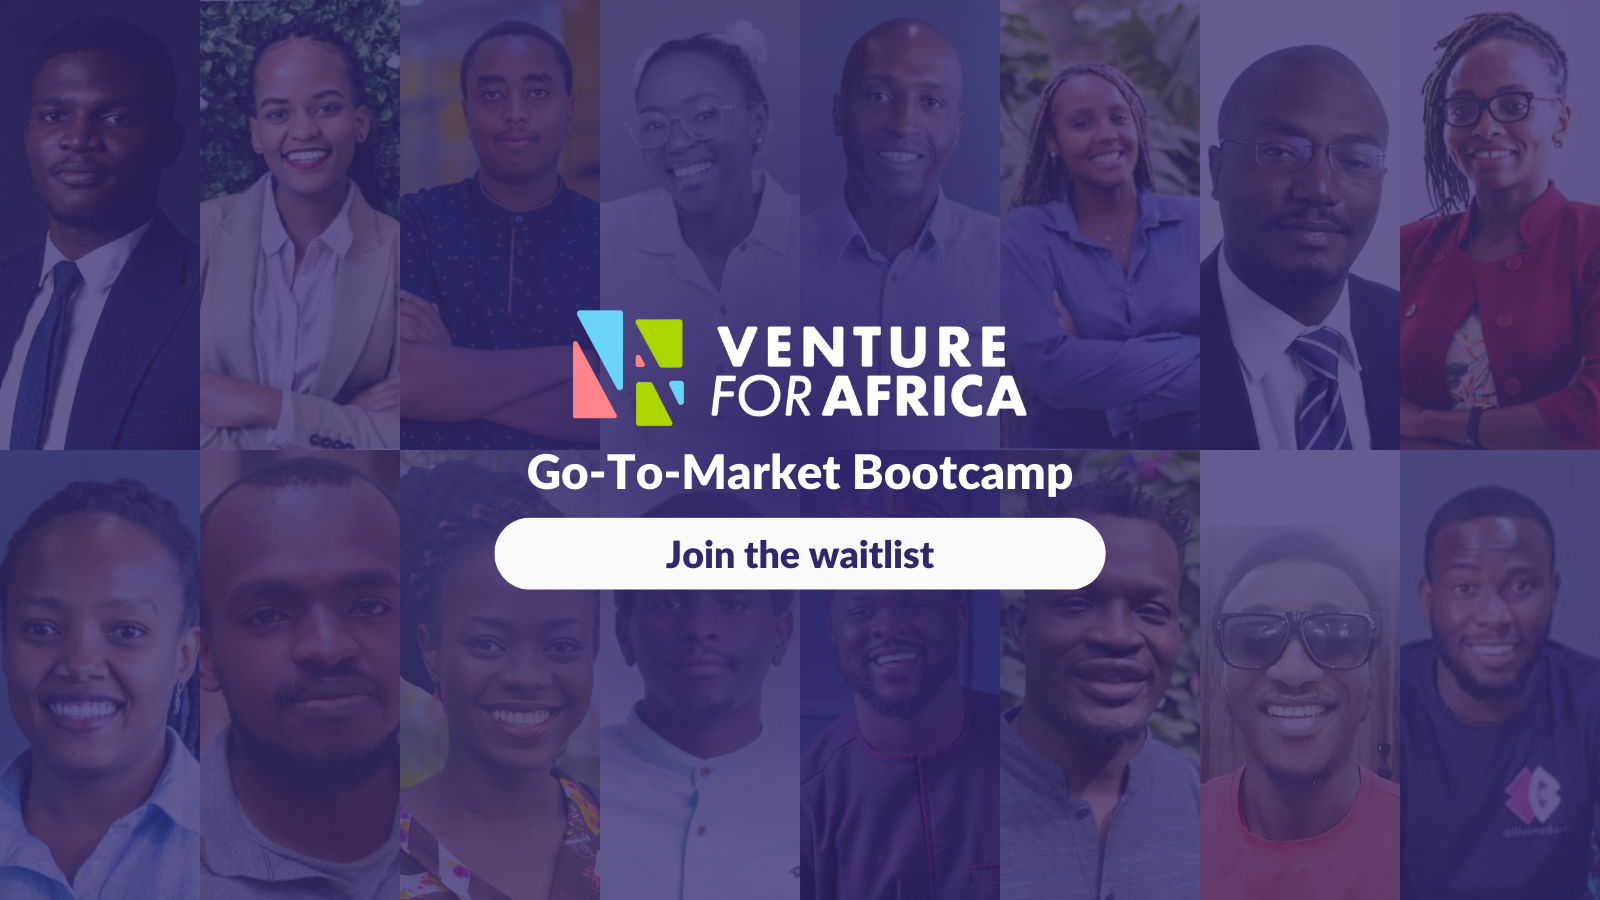 African startups can attend VFA’s Go-To-Market bootcamp